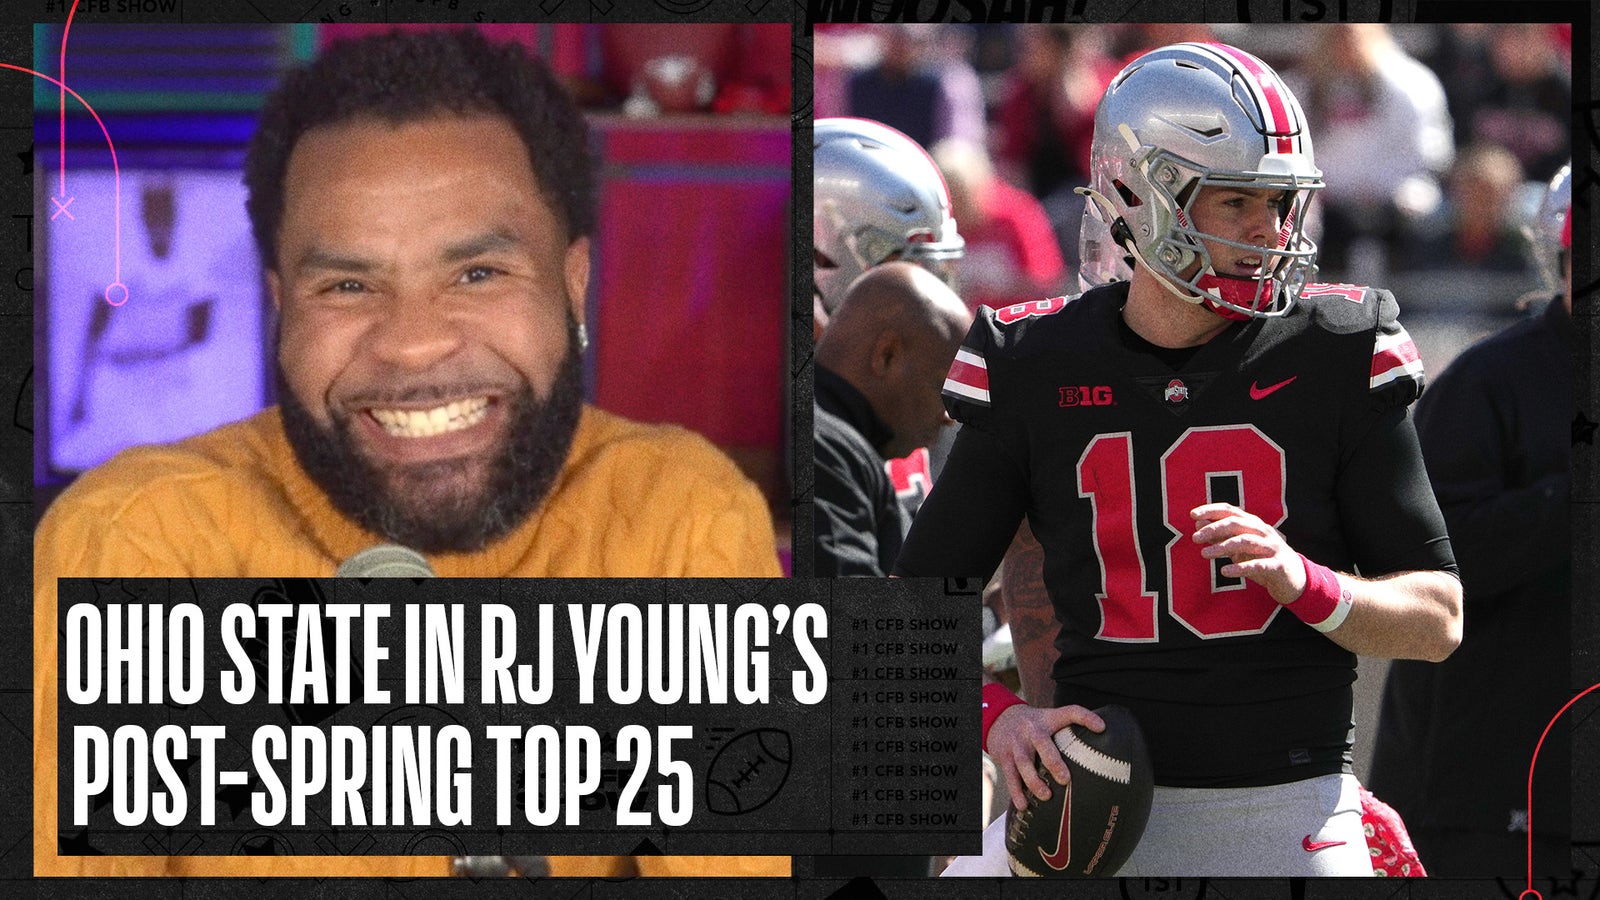 Ohio State, Texas & Michigan in RJ Young's post-spring top 25